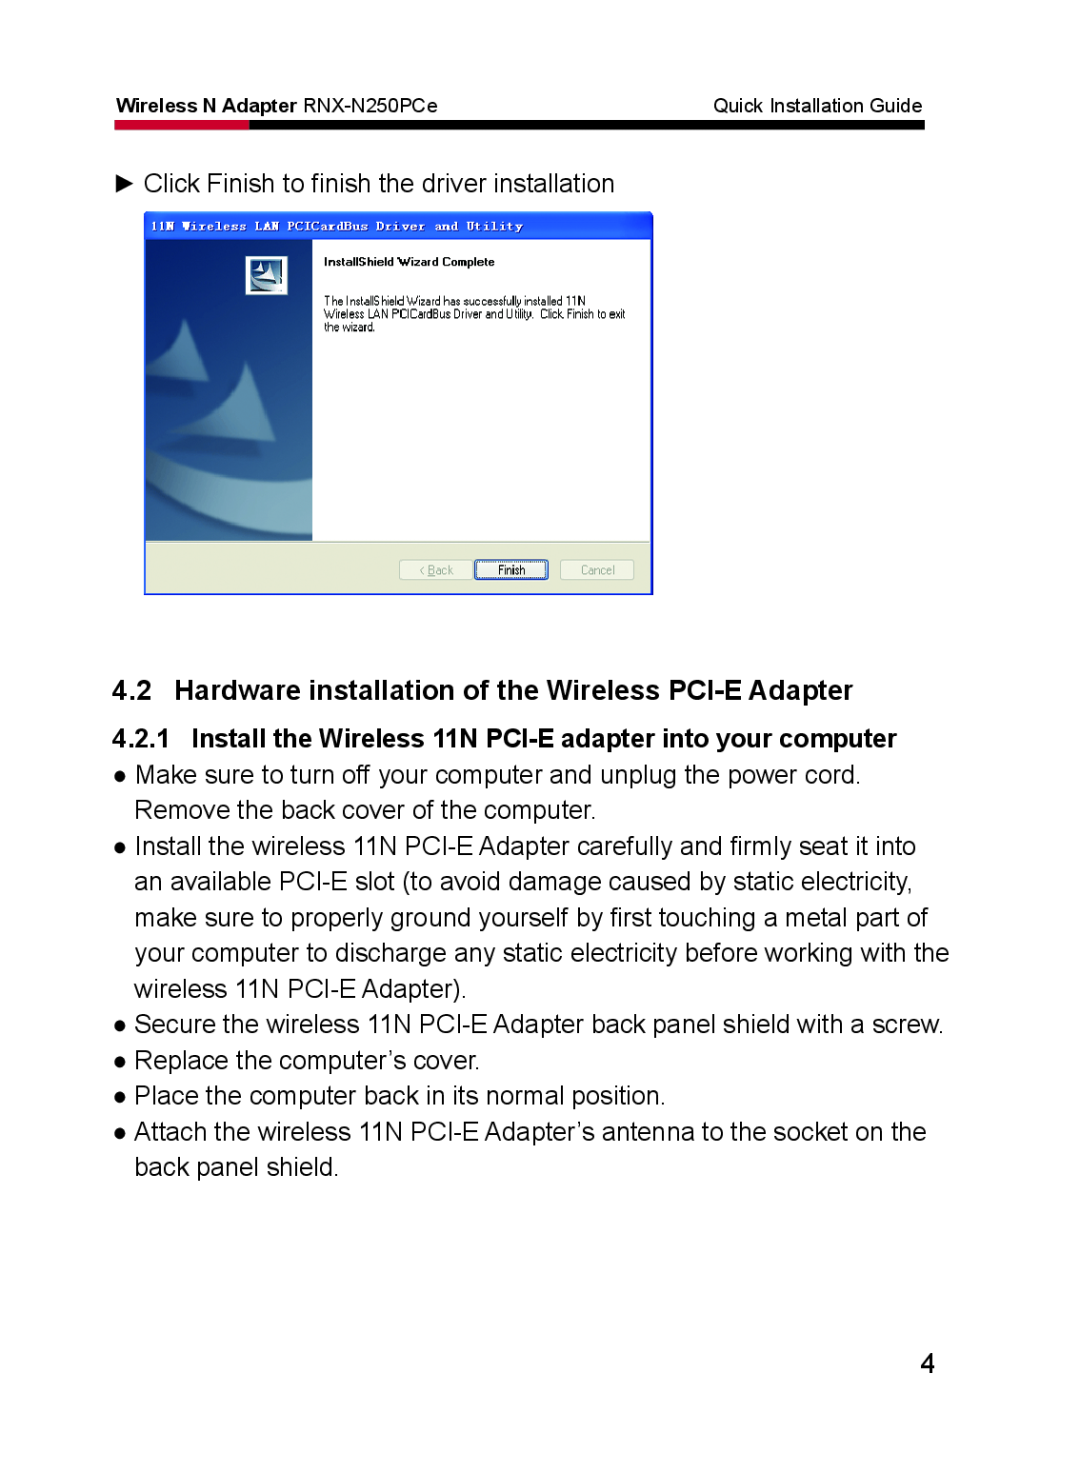 Rosewill RNX-N250PCe manual Hardware installation of the Wireless PCI-E Adapter 